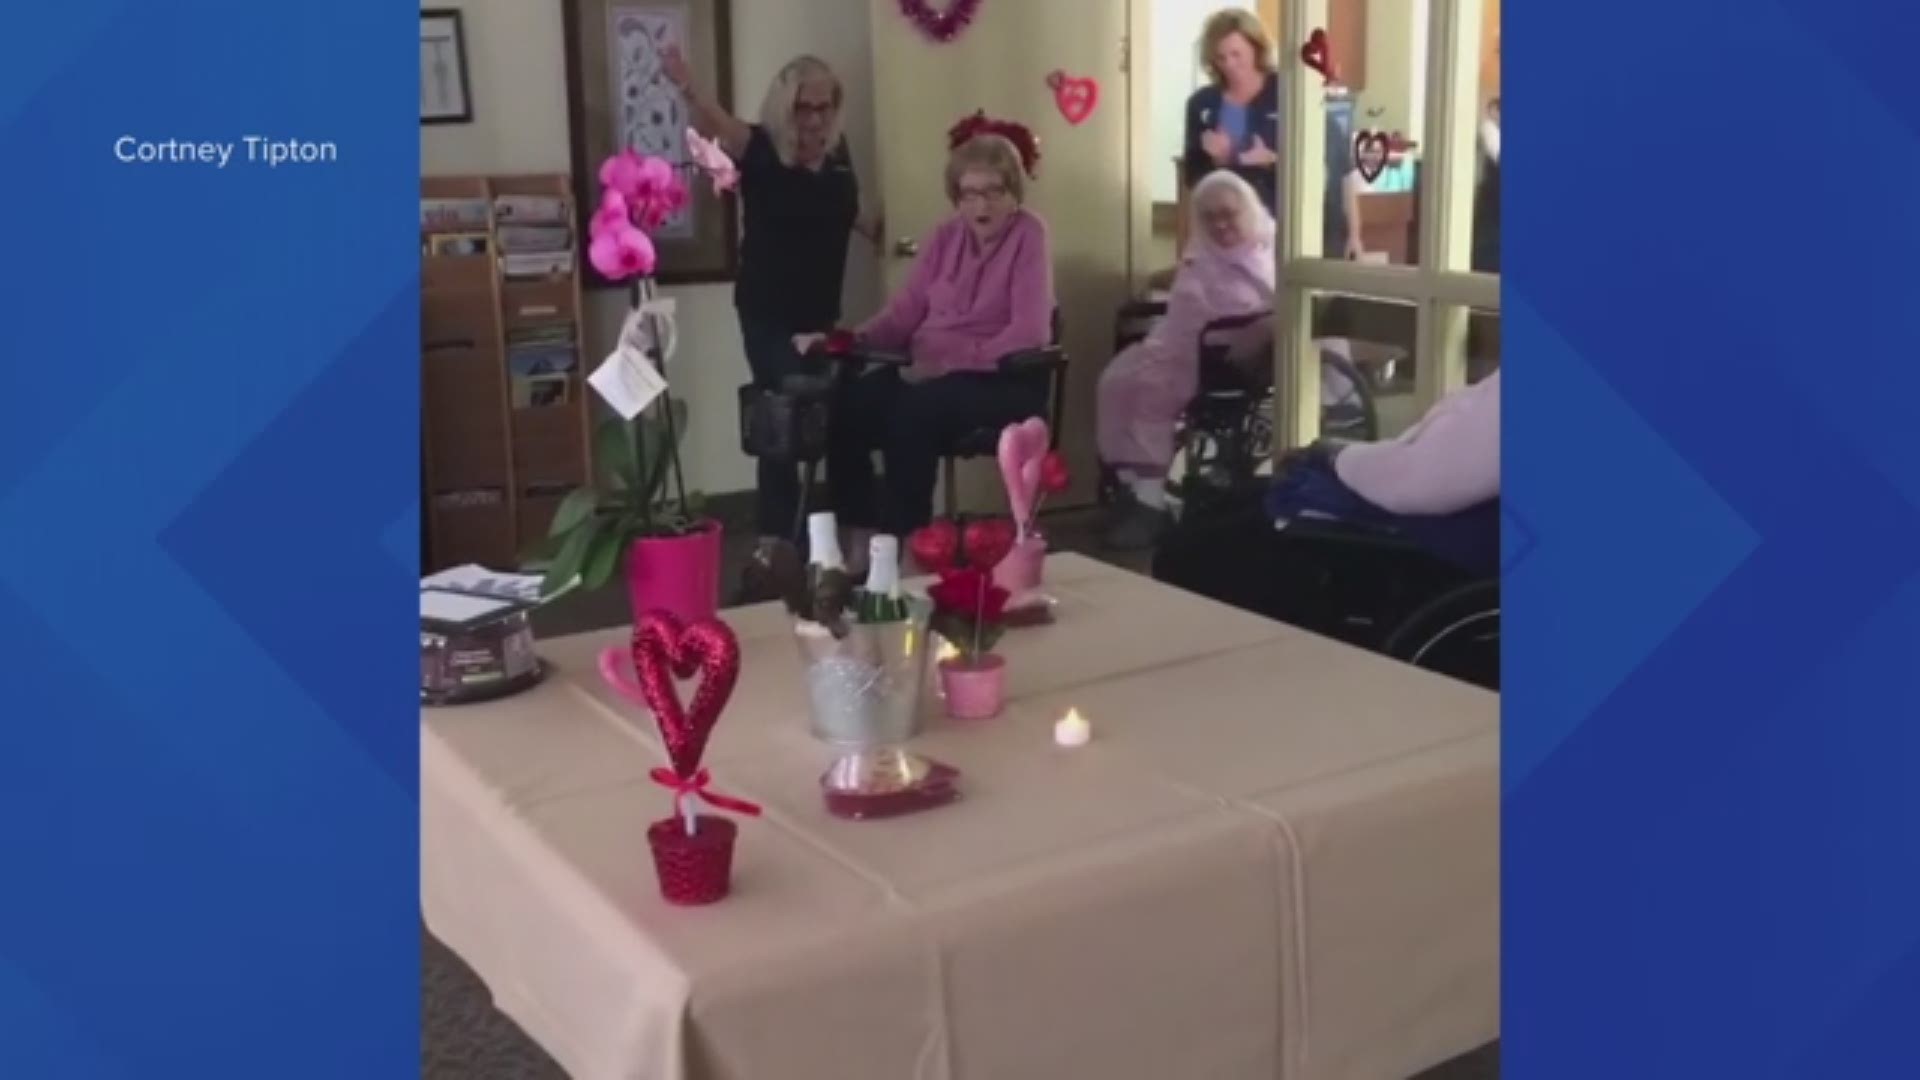 Staff put together a special Valentine's Day setup and even serenaded the couple after a fall prevented them from spending the holiday together.